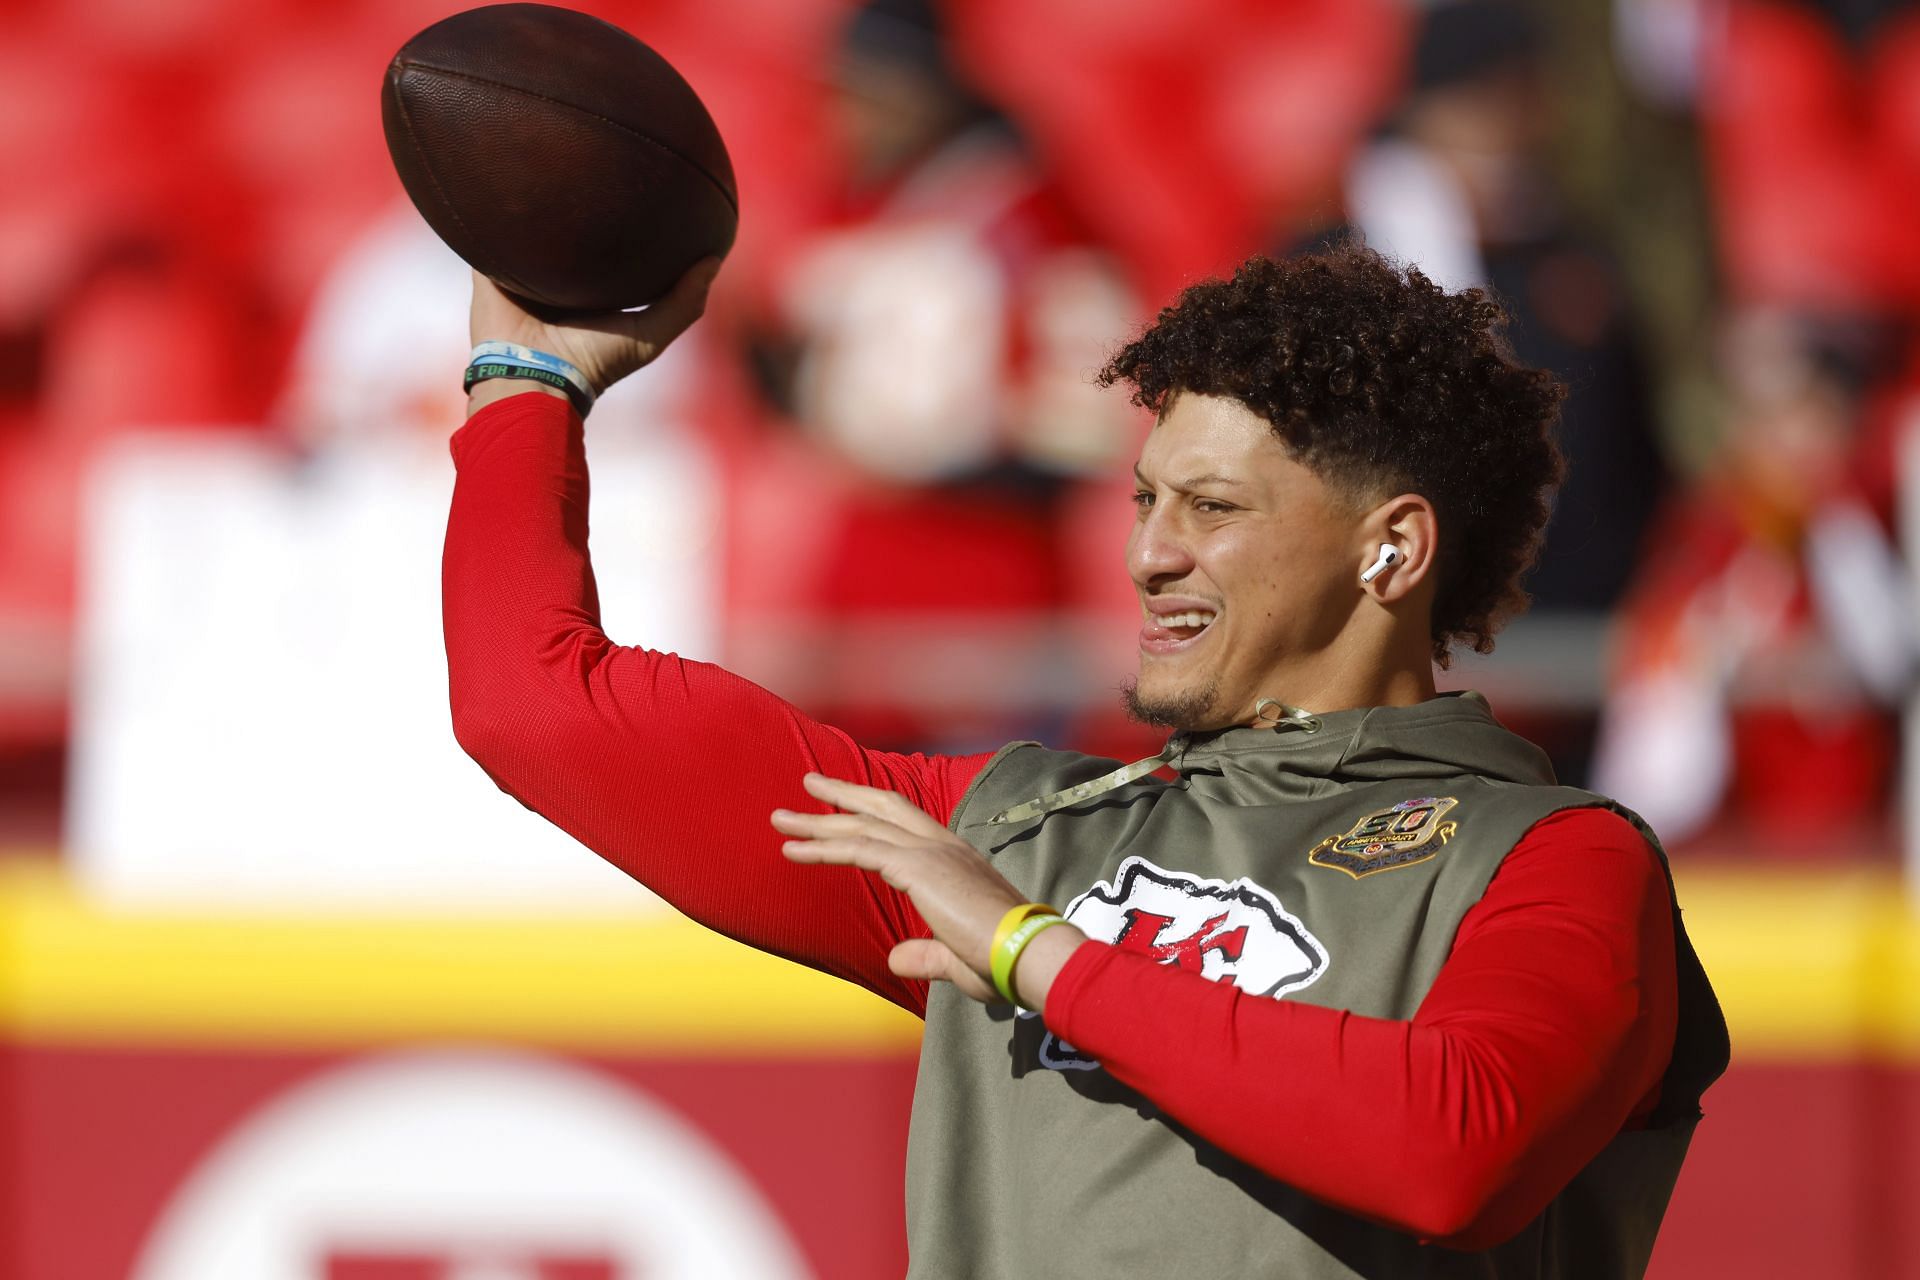 Is Patrick Mahomes' father the retired MLB player? - DraftKings